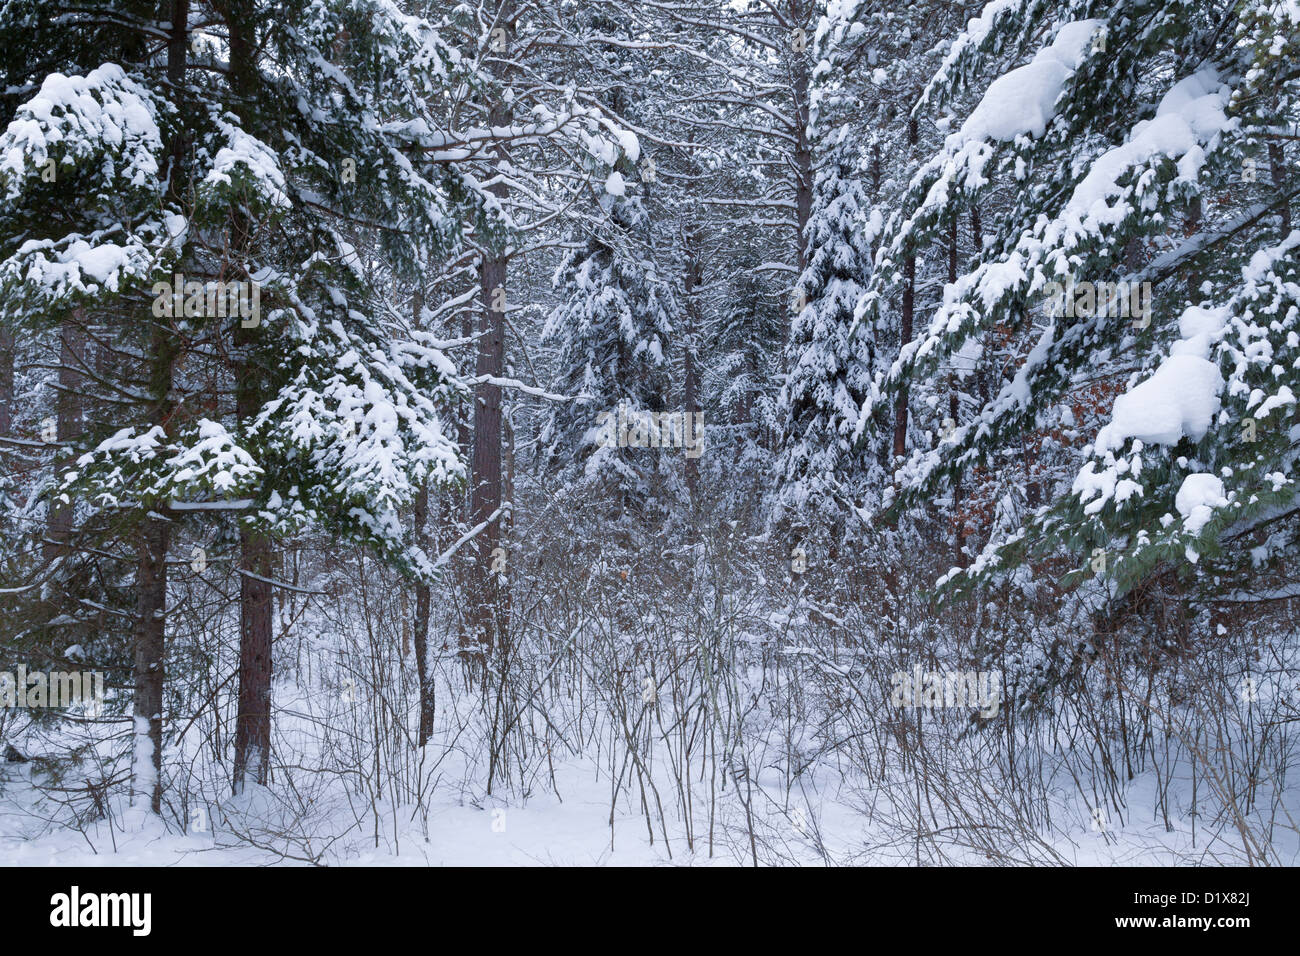 Typical Northern Minnesota winter forest terrain - Chippewa National Forest. Stock Photo